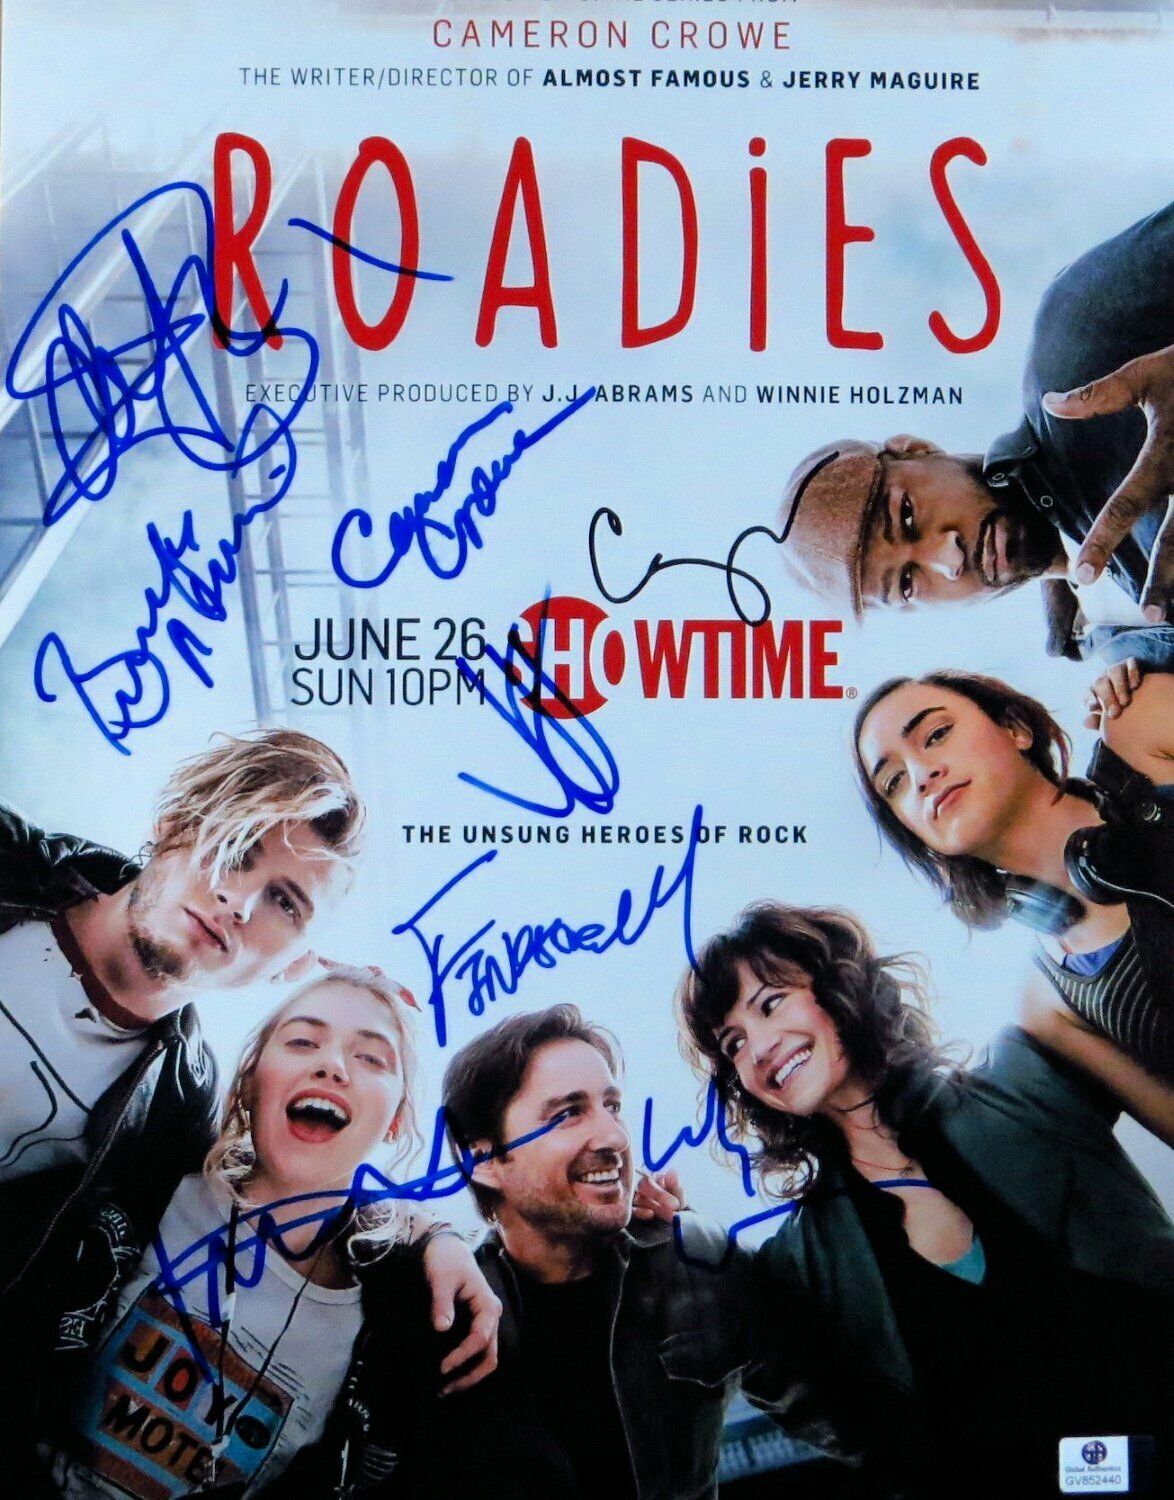 Roadies Cast Signed 11X14 Photo Poster painting Wilson/Gugino/Mitchell/Abrams/Crowe +3 GV852440